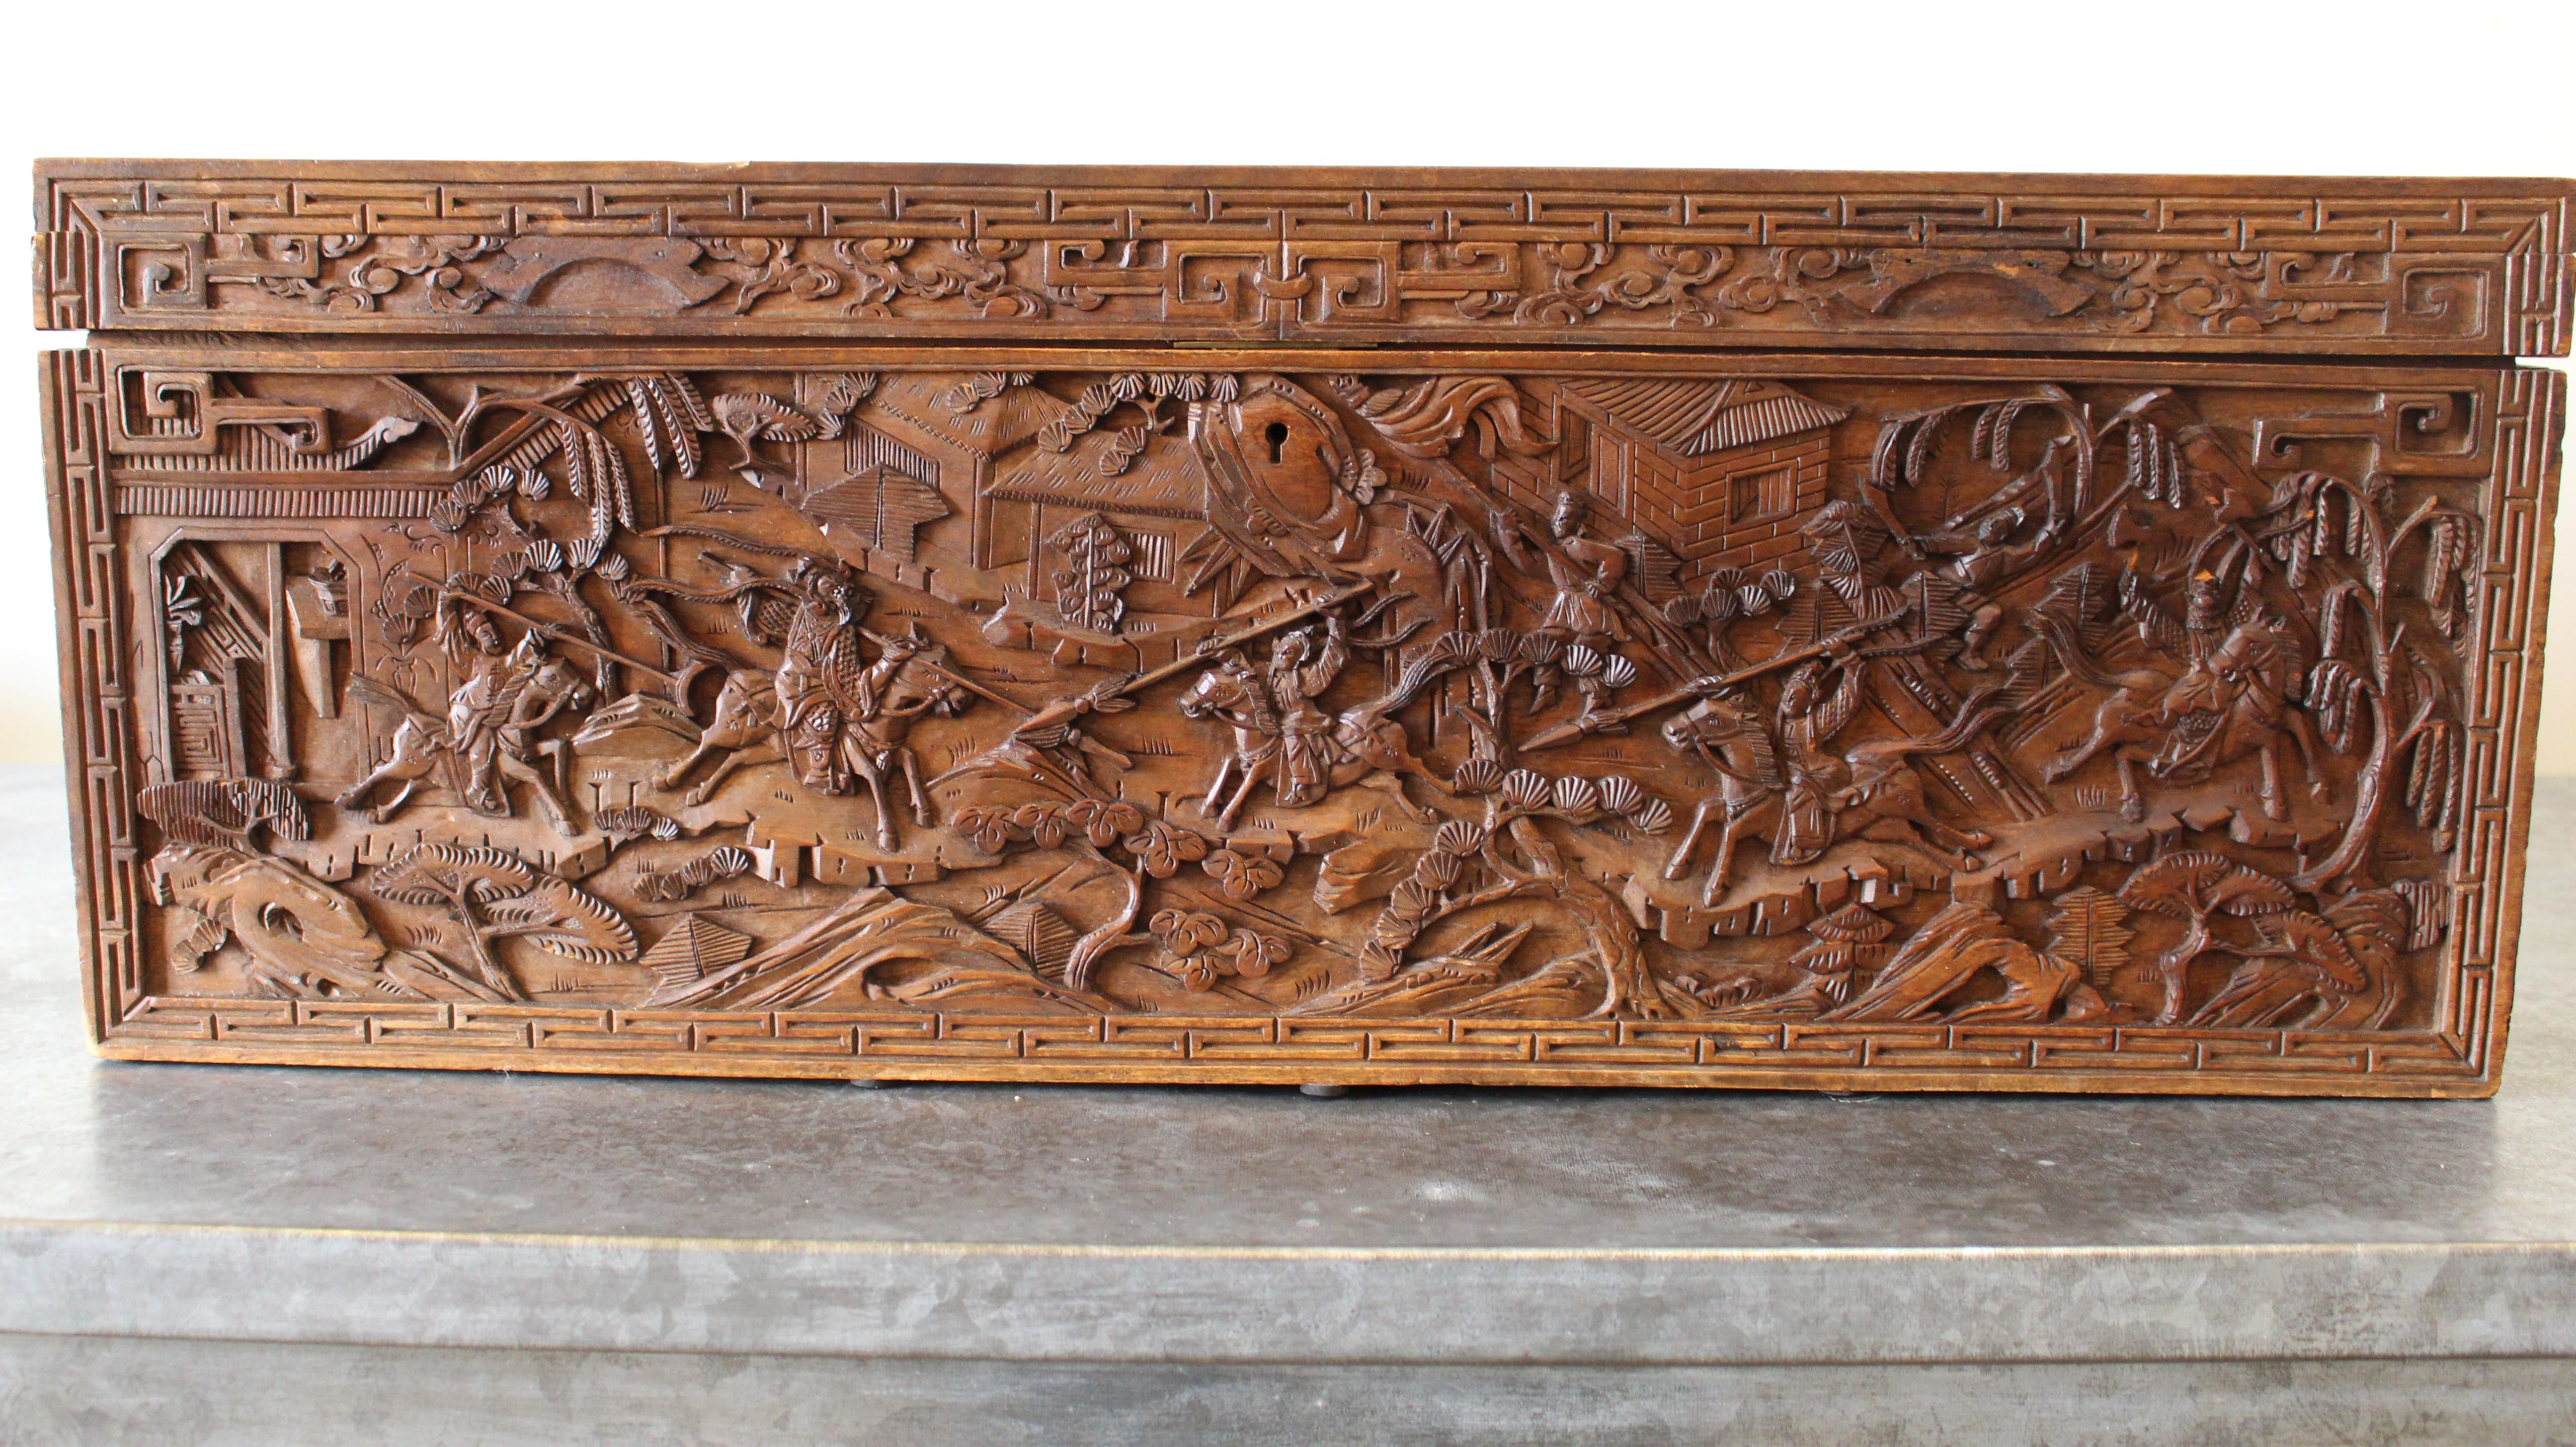 A 19th century Chinese carved camphor wood document box. The intricately carved box depicts the story of a warrior battle.  The document box showcases meticulous wooden dragon carved handles and Chinese key motifs. 